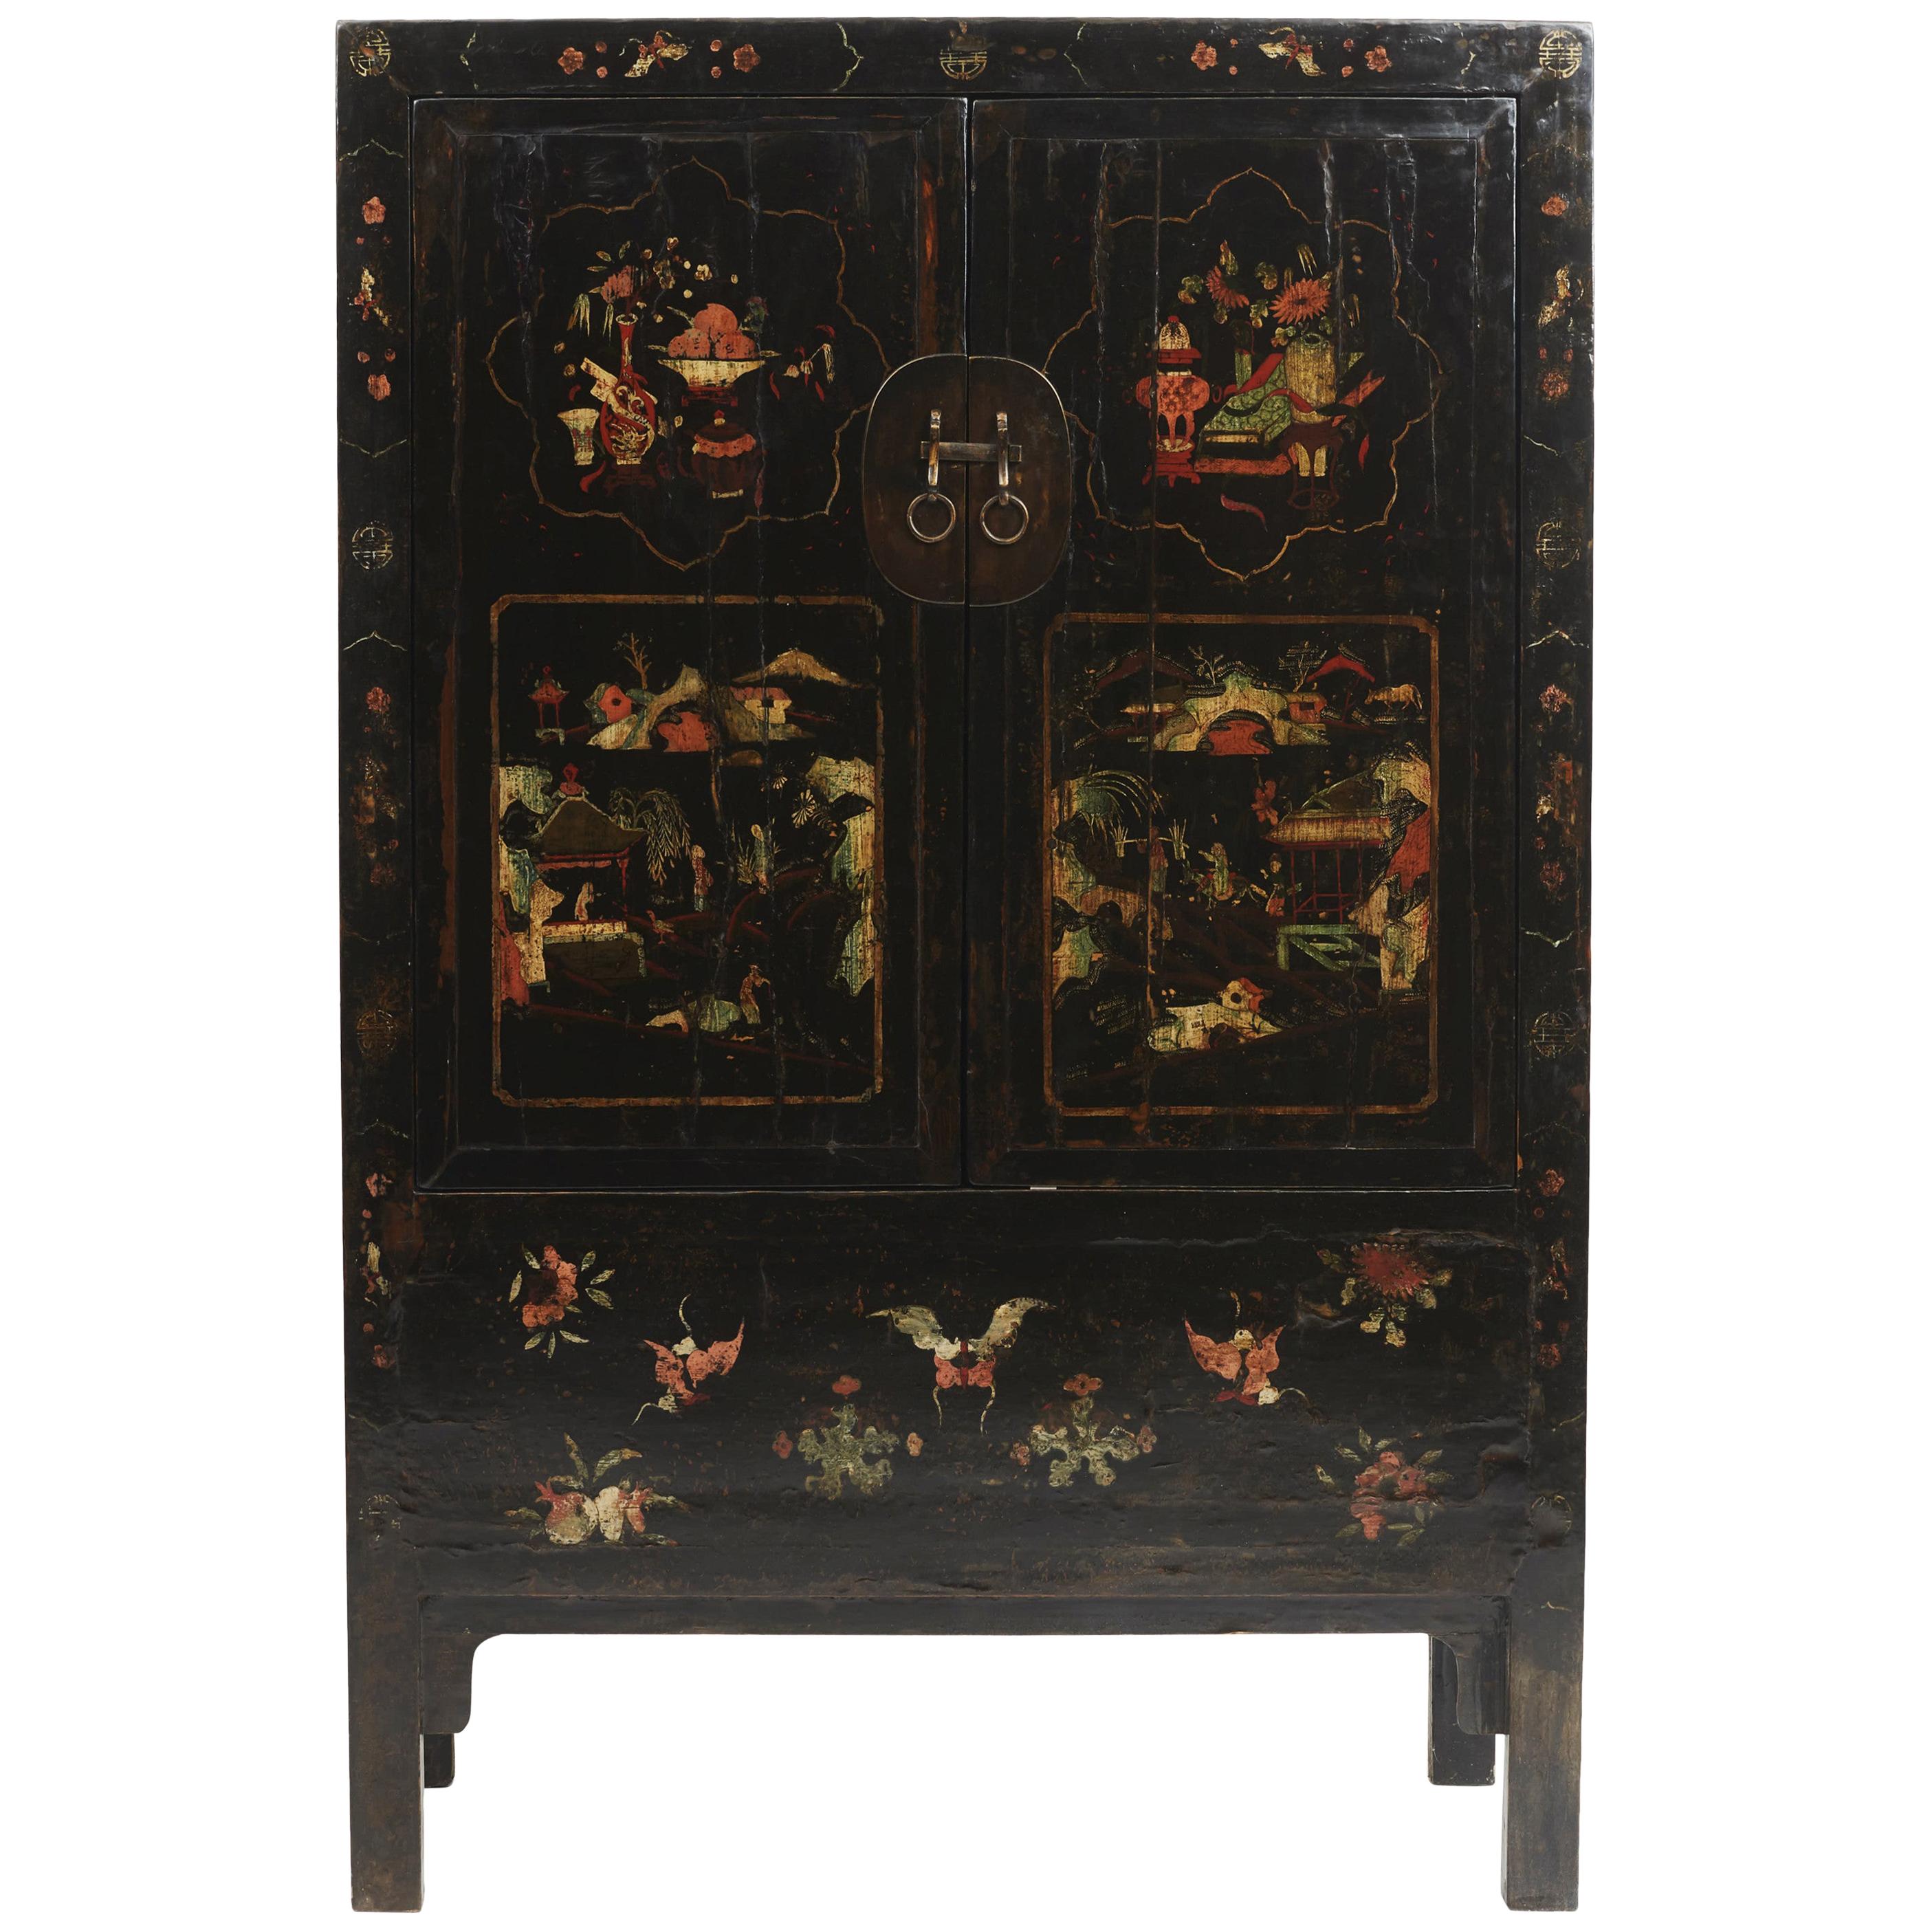 19th Century Chinese Lacquered Cabinet with Original Decorations, Shanxi